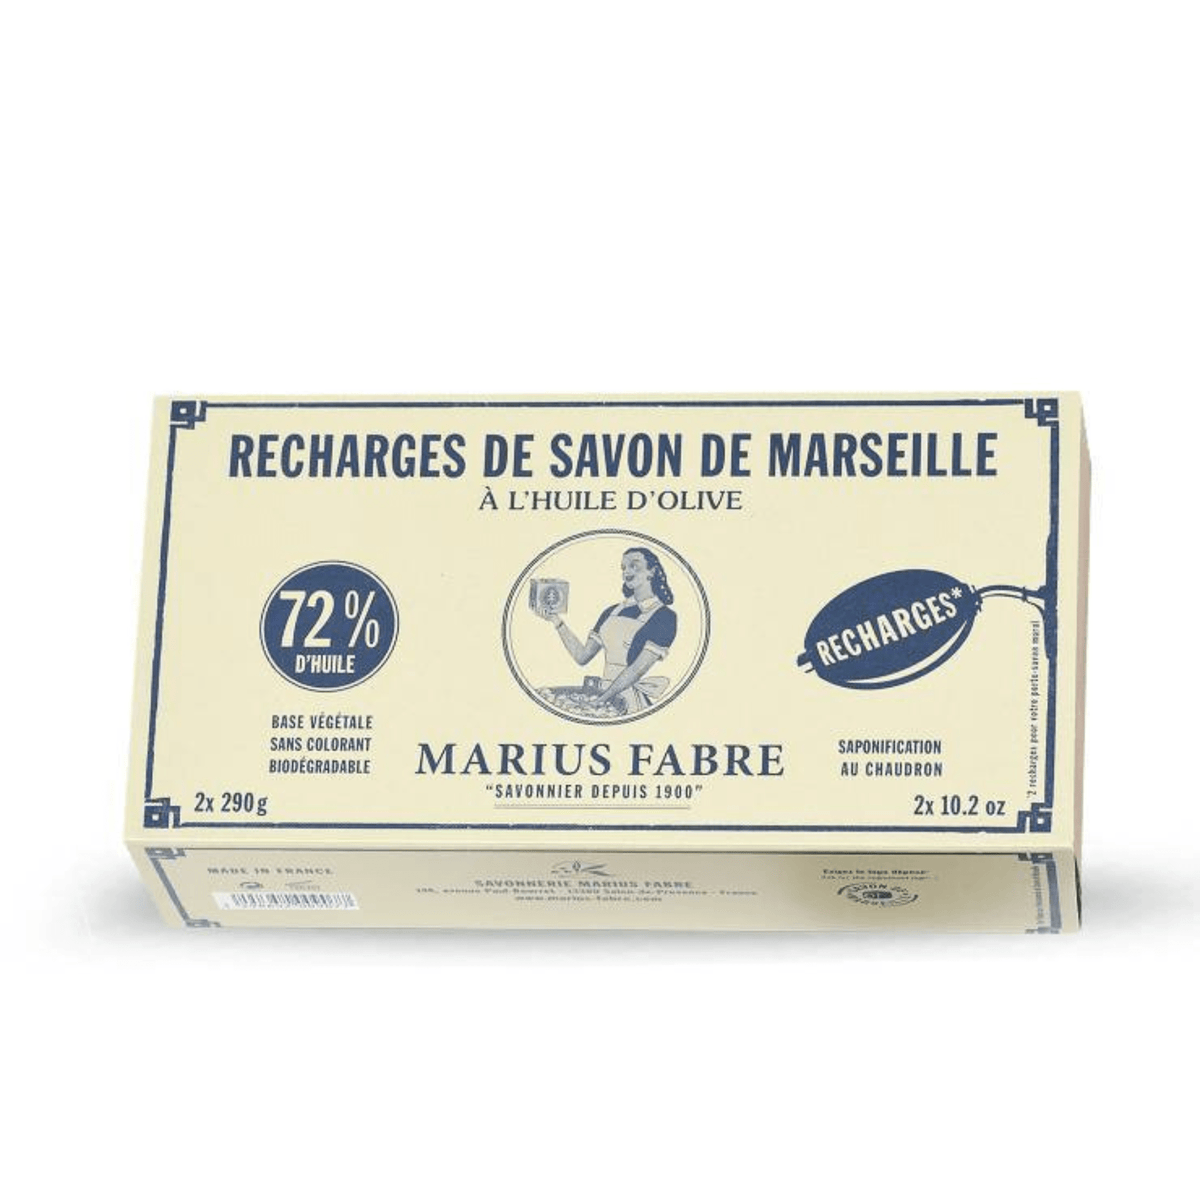 Primary Image of Olive Oil Marseille Soap To Hang - Refill